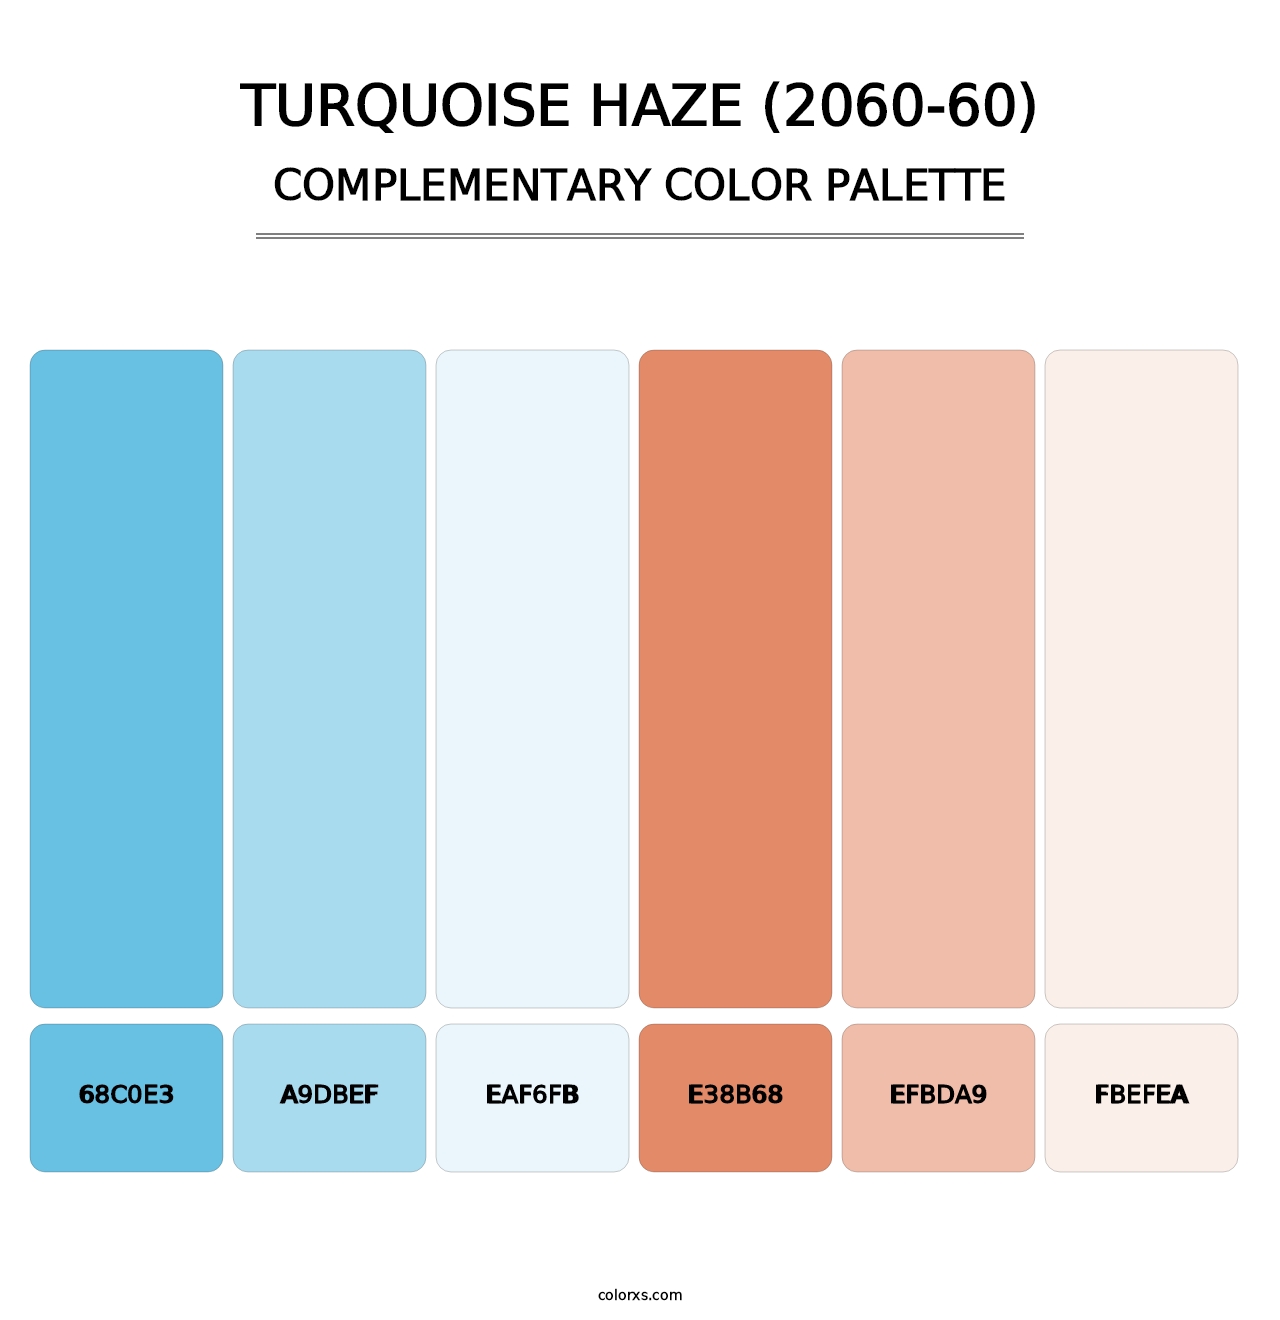 Turquoise Haze (2060-60) - Complementary Color Palette